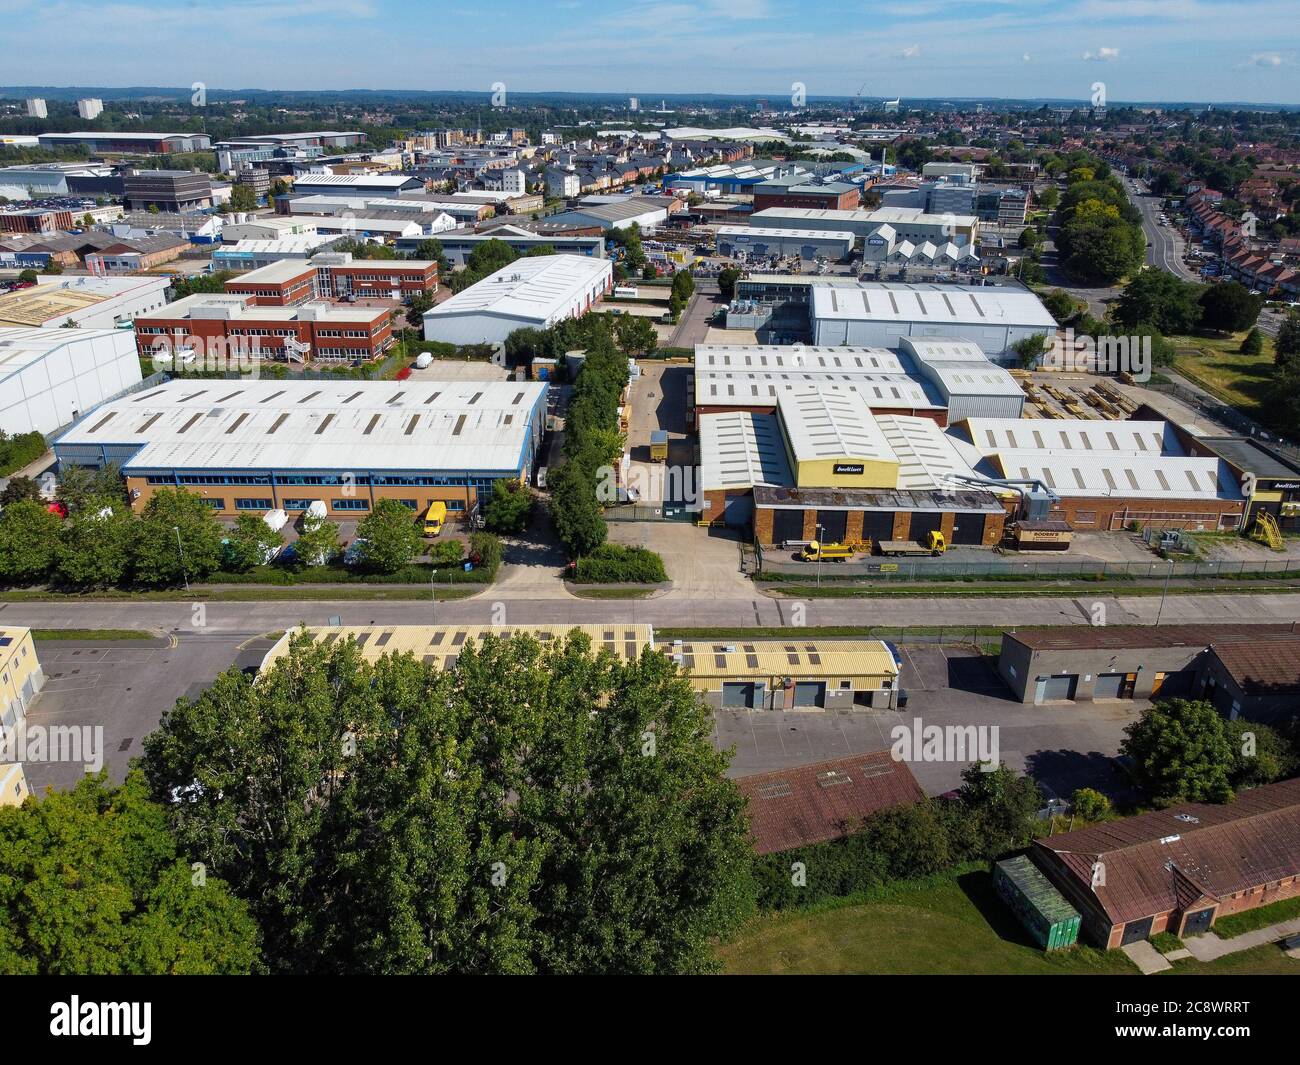 Reading United Kingdom July 12 2020 Aerial Image Of Warehouses And Offices Off Basingstoke Road 2C8WRRT 